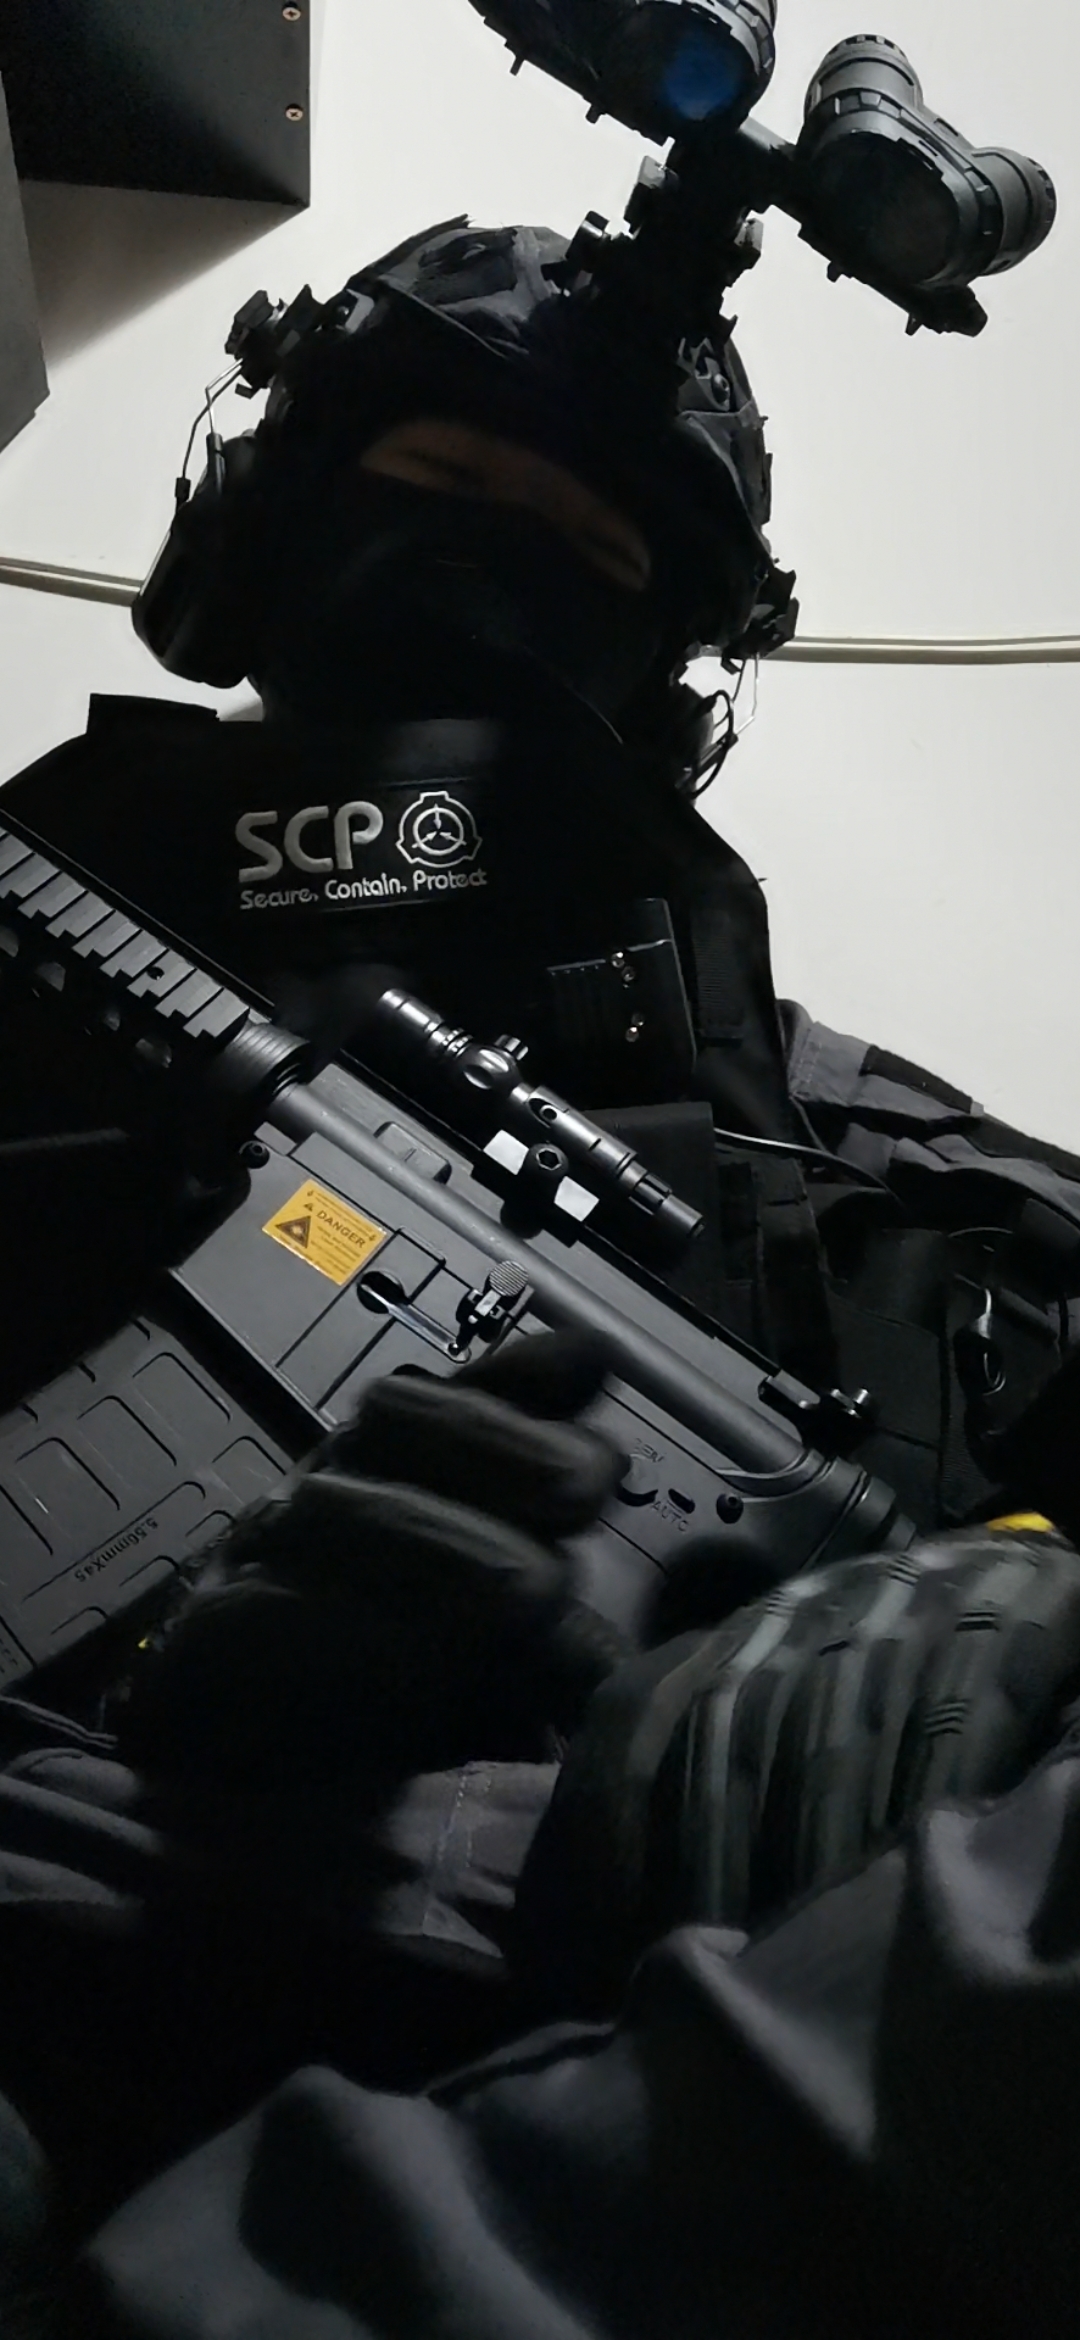 SCP Soldier picture pic